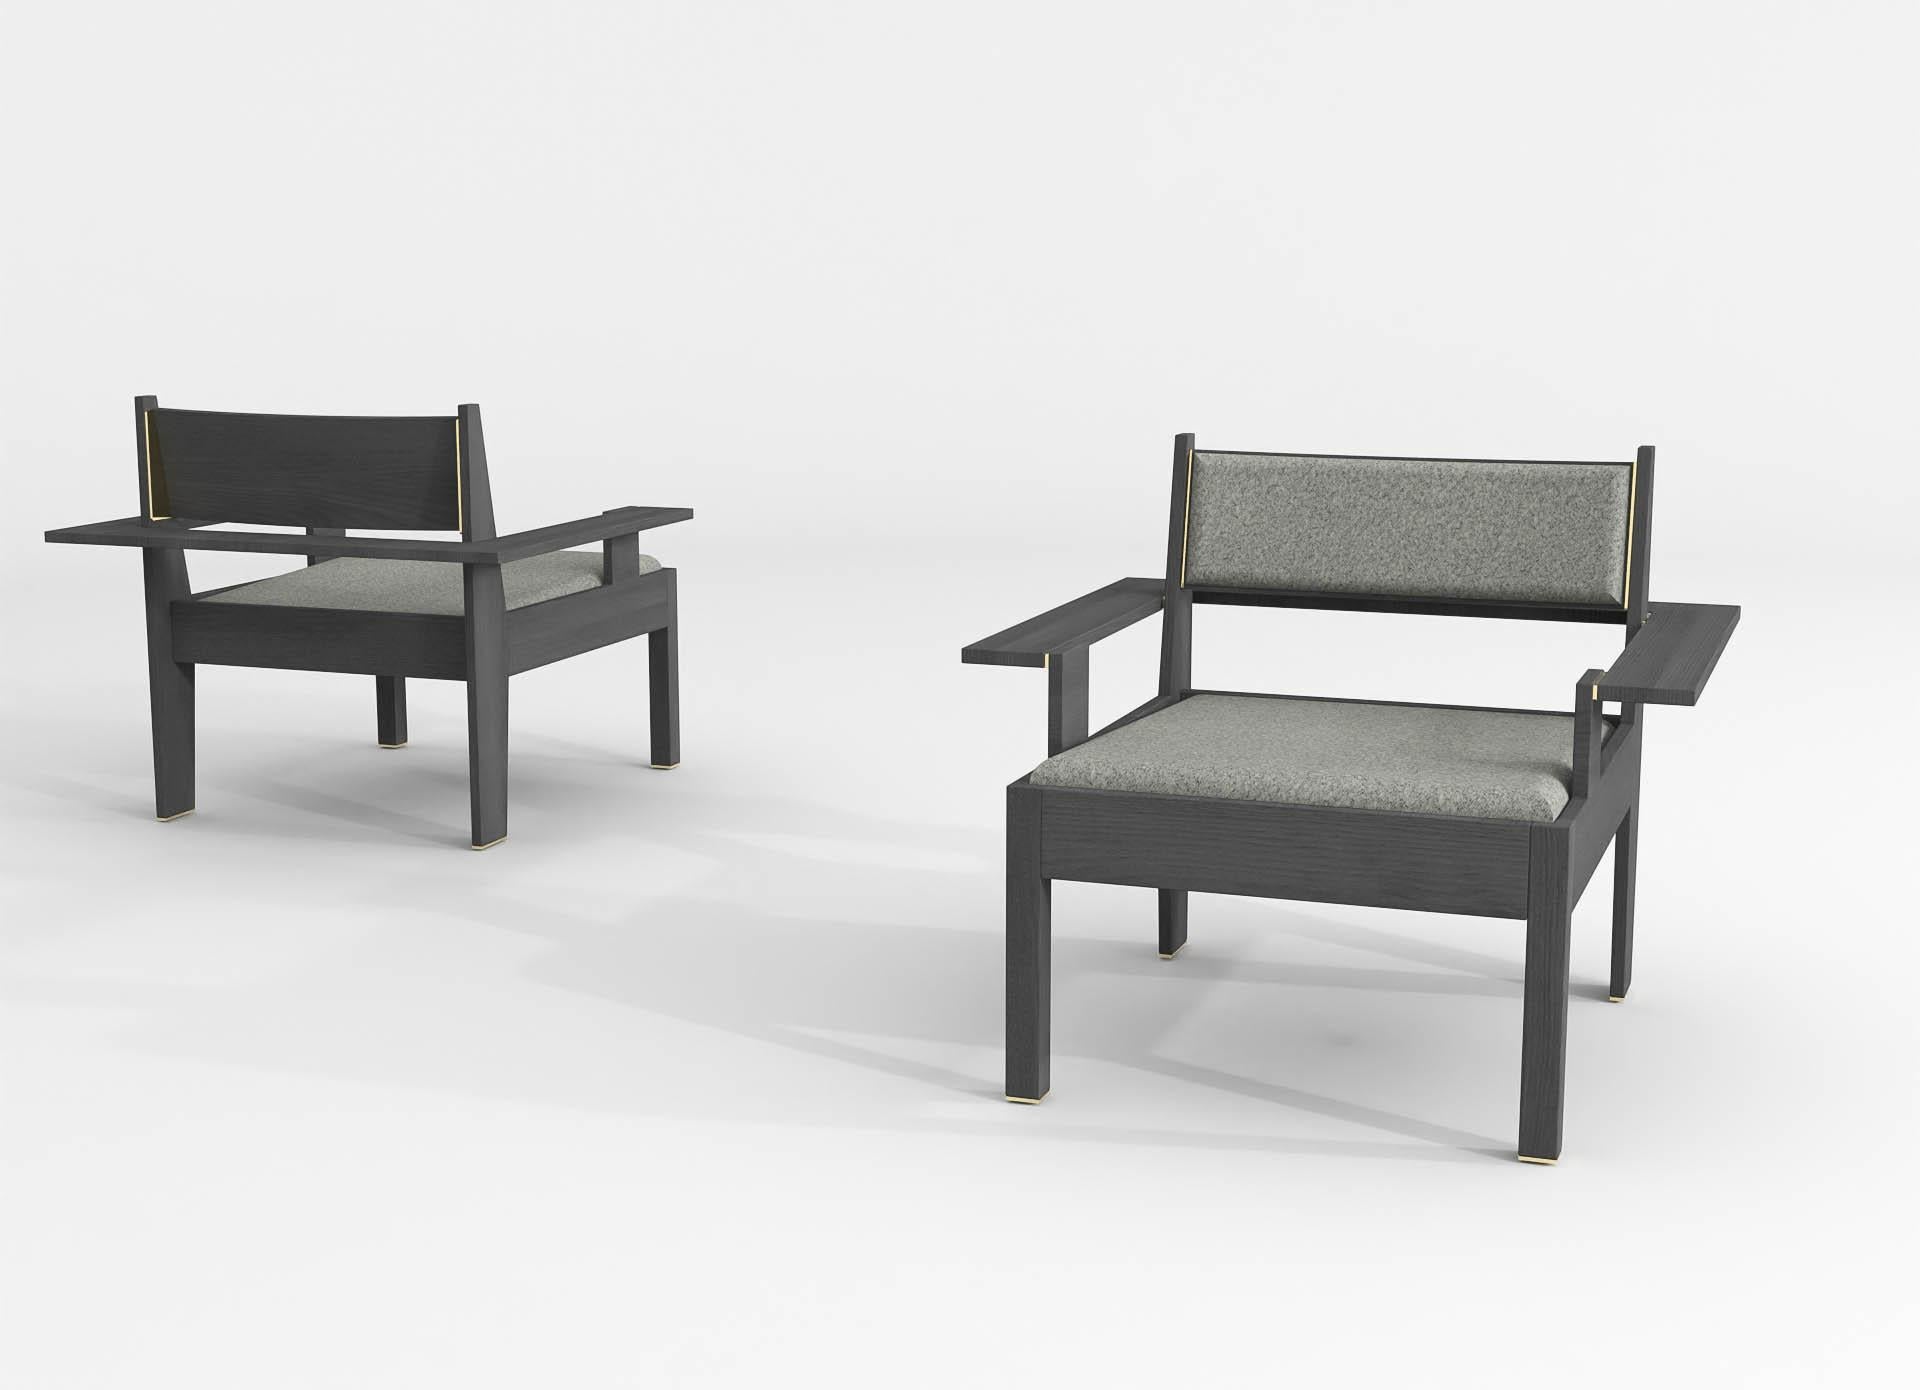 The barh lounge chair is another design from our barh chair series. When used together with a set of barh chairs, a charming harmony arises within your space. The barh lounge chairs also stand strong on their own with its classic contemporary